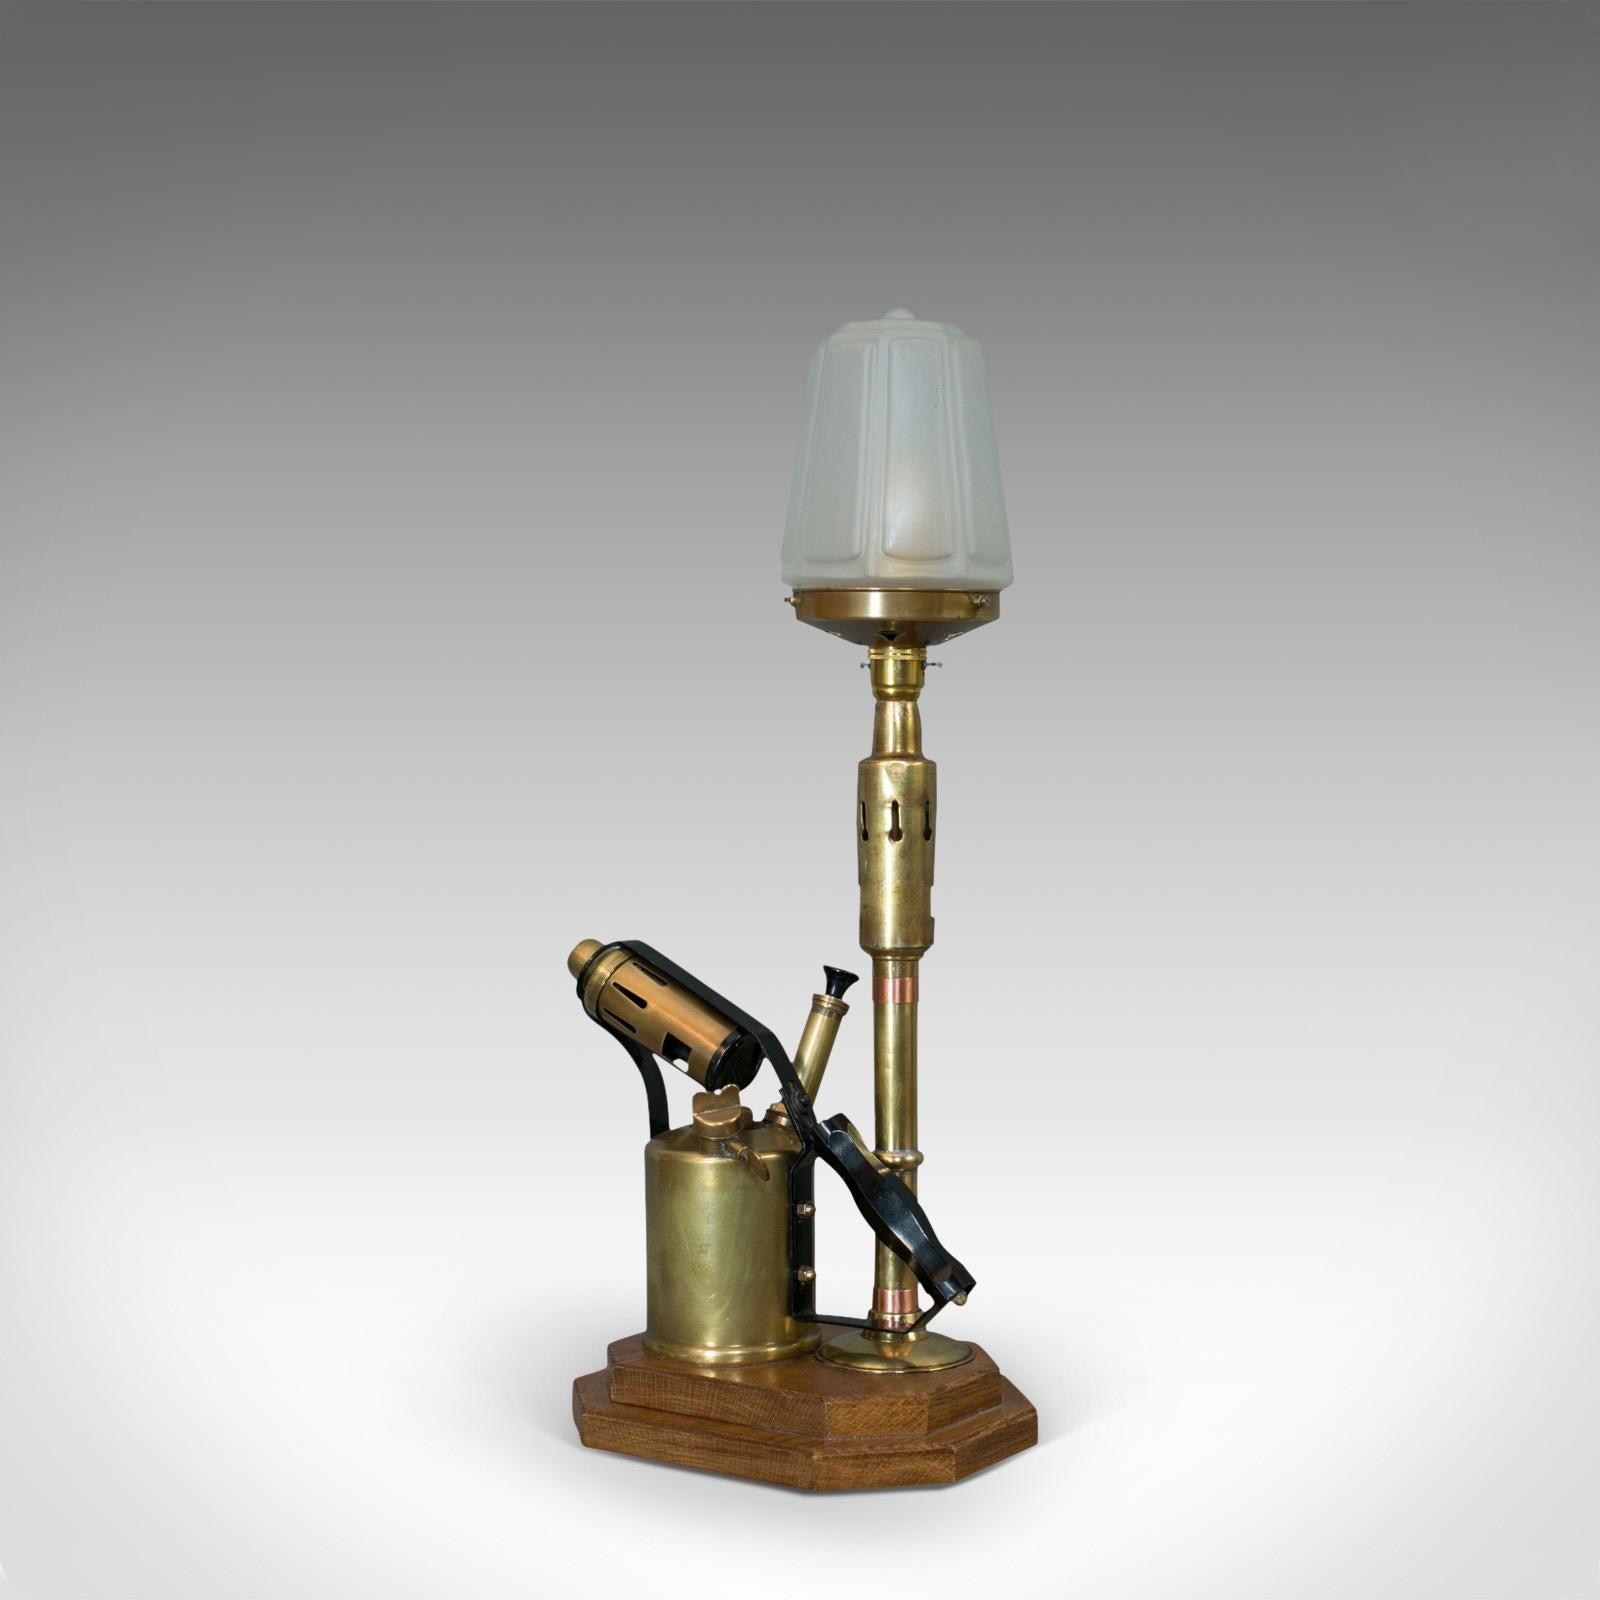 This is a vintage decorative lamp. An English, brass blow torch light with shade with oak base and dating to the 20th century.

Fascinating lamp with industrial appeal
In excellent condition, fully working with quality, opaque fluted lamp